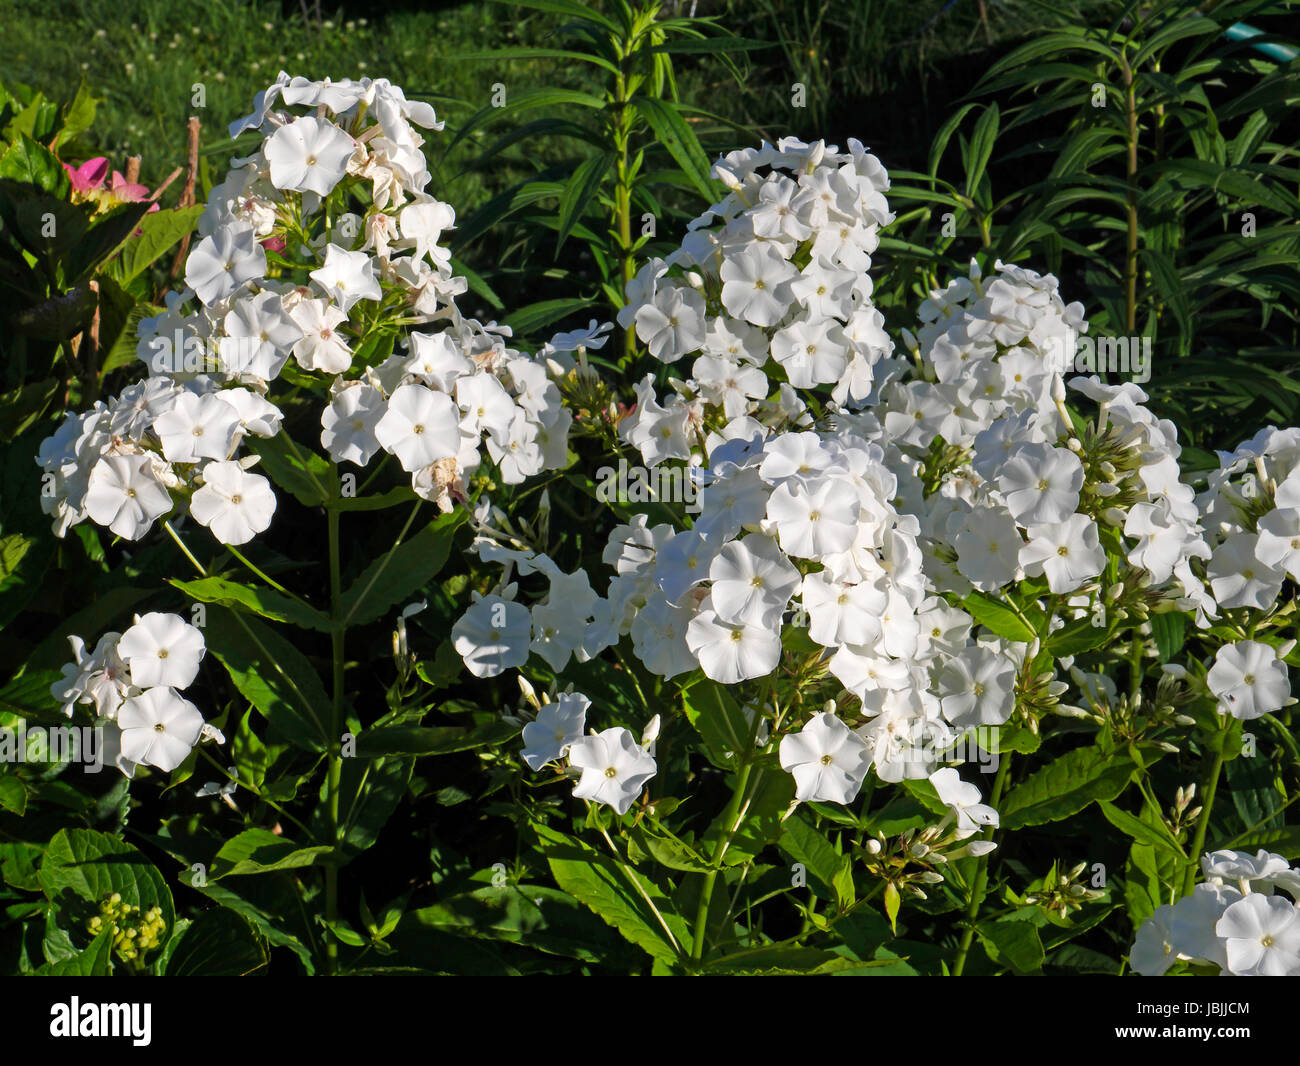 Phlox in bloom, phlox paniculata 'White Admiral' (Suzanne's vegetable garden, Le Pas, Mayenne, France). Stock Photo